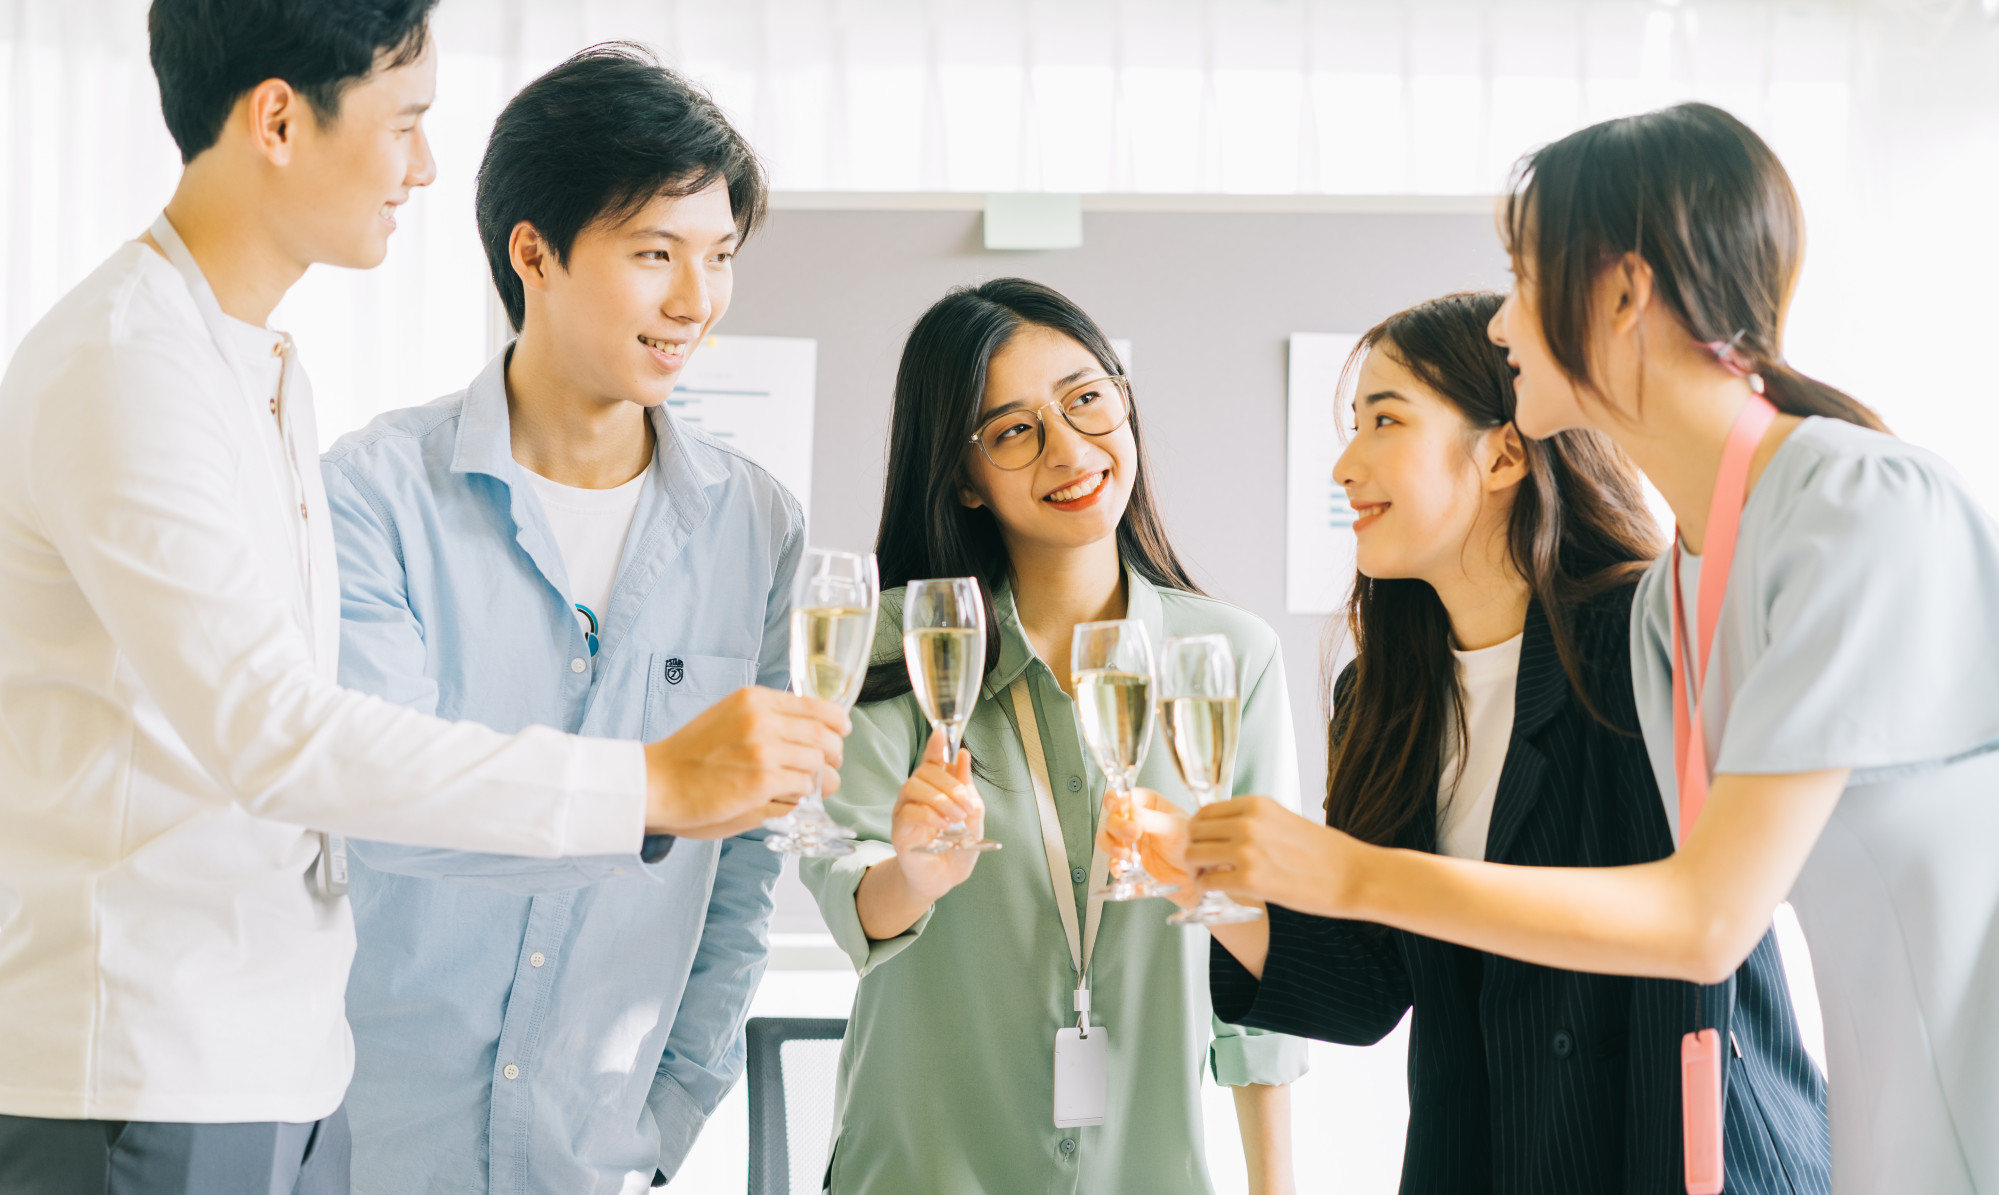 Raising hell: The Hong Kong office worker claims his boss is angry because he raised his glass “too high” while toasting. Photo: Shutterstock